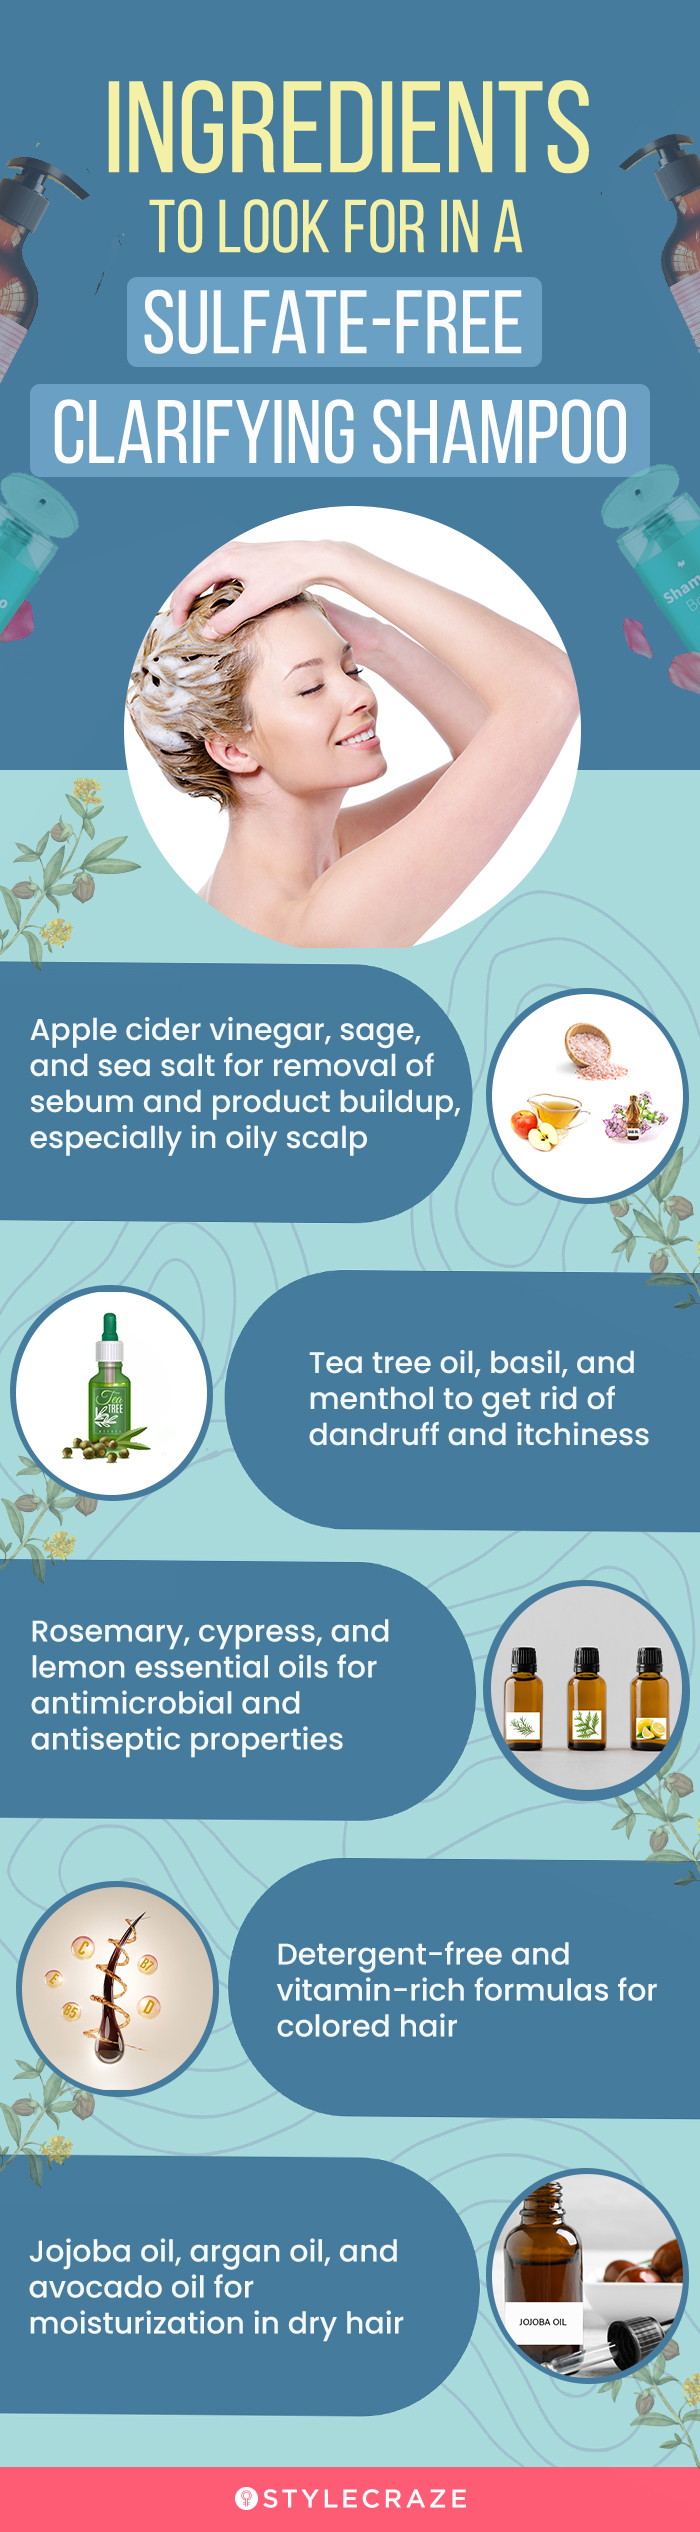 Ingredients To Look For In A Sulfate Free Shampoo (infographic)